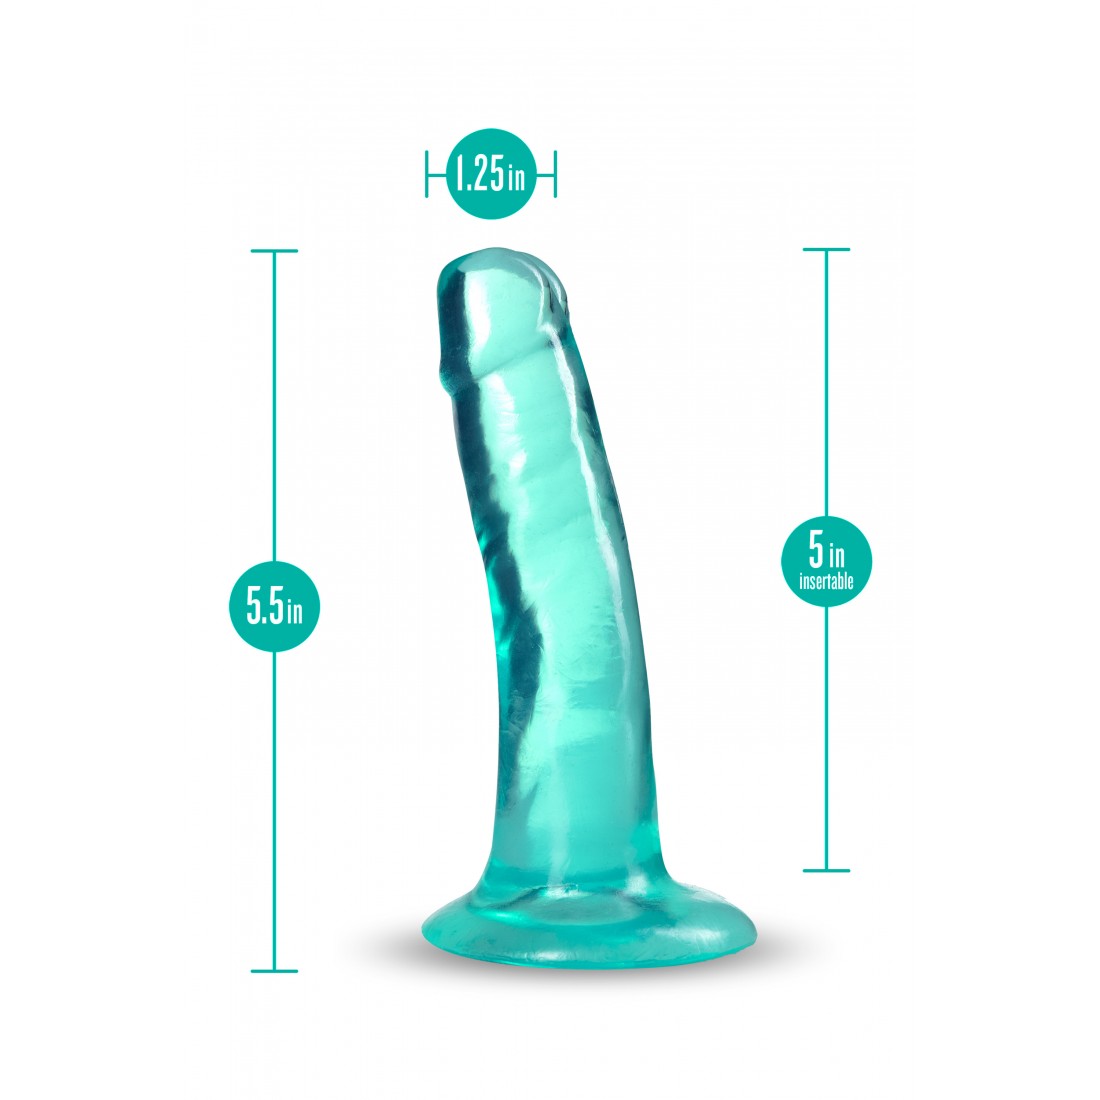 Suction dildo positions